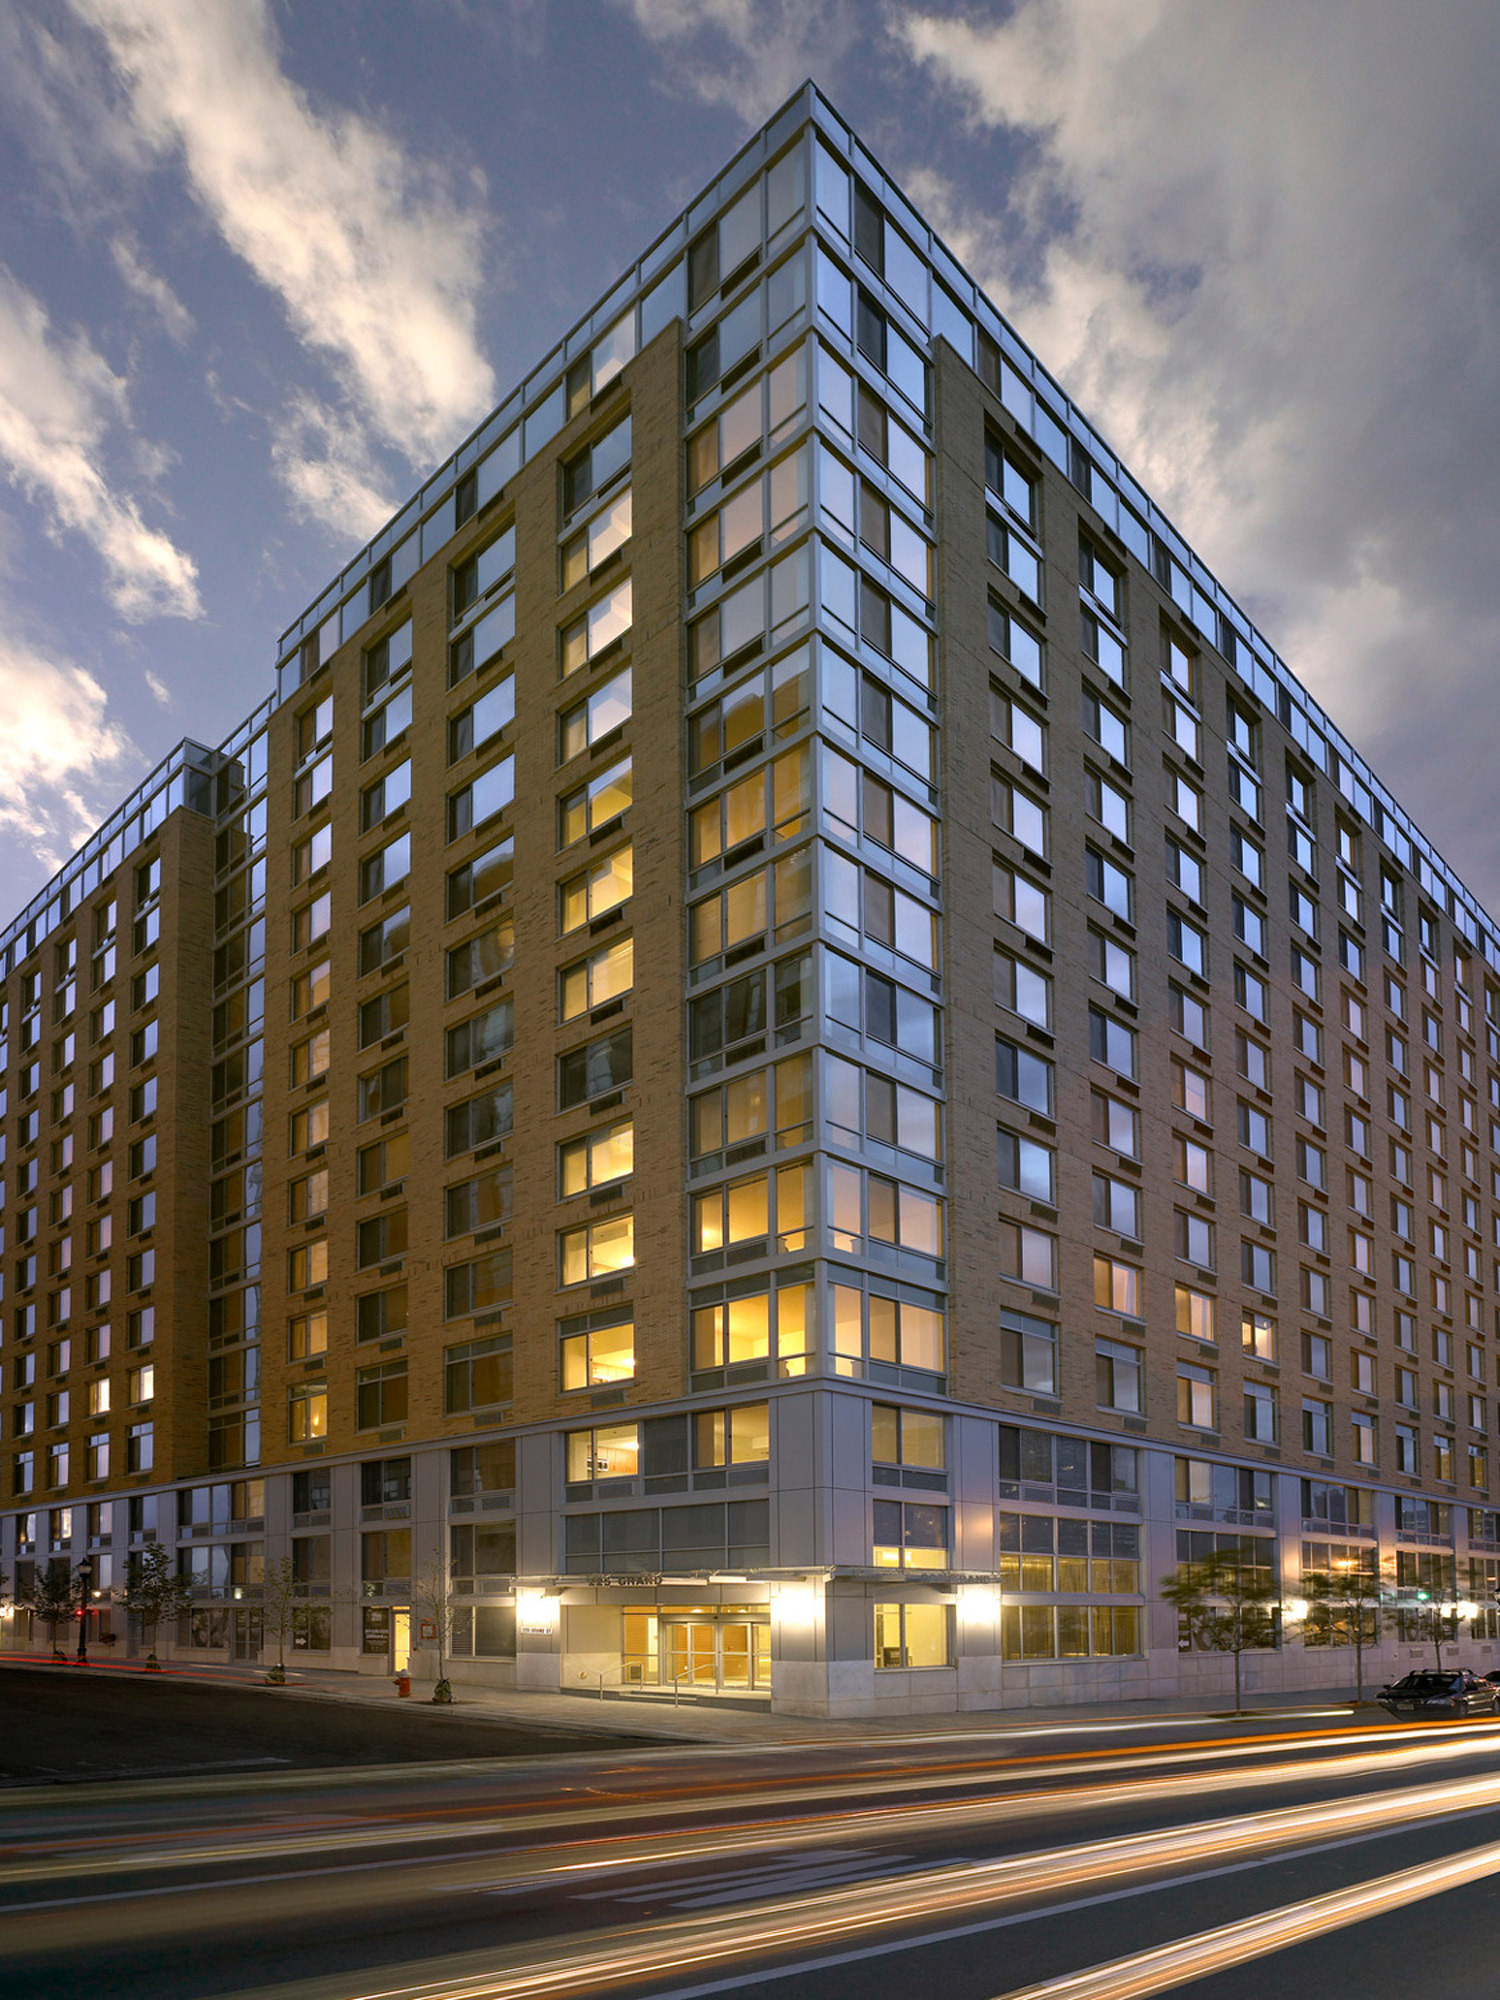 Modern multi-story building captured at dusk, featuring a mix of reflective glass windows and warm-toned brick cladding, with dynamic street-level lighting adding vibrancy to its urban setting.